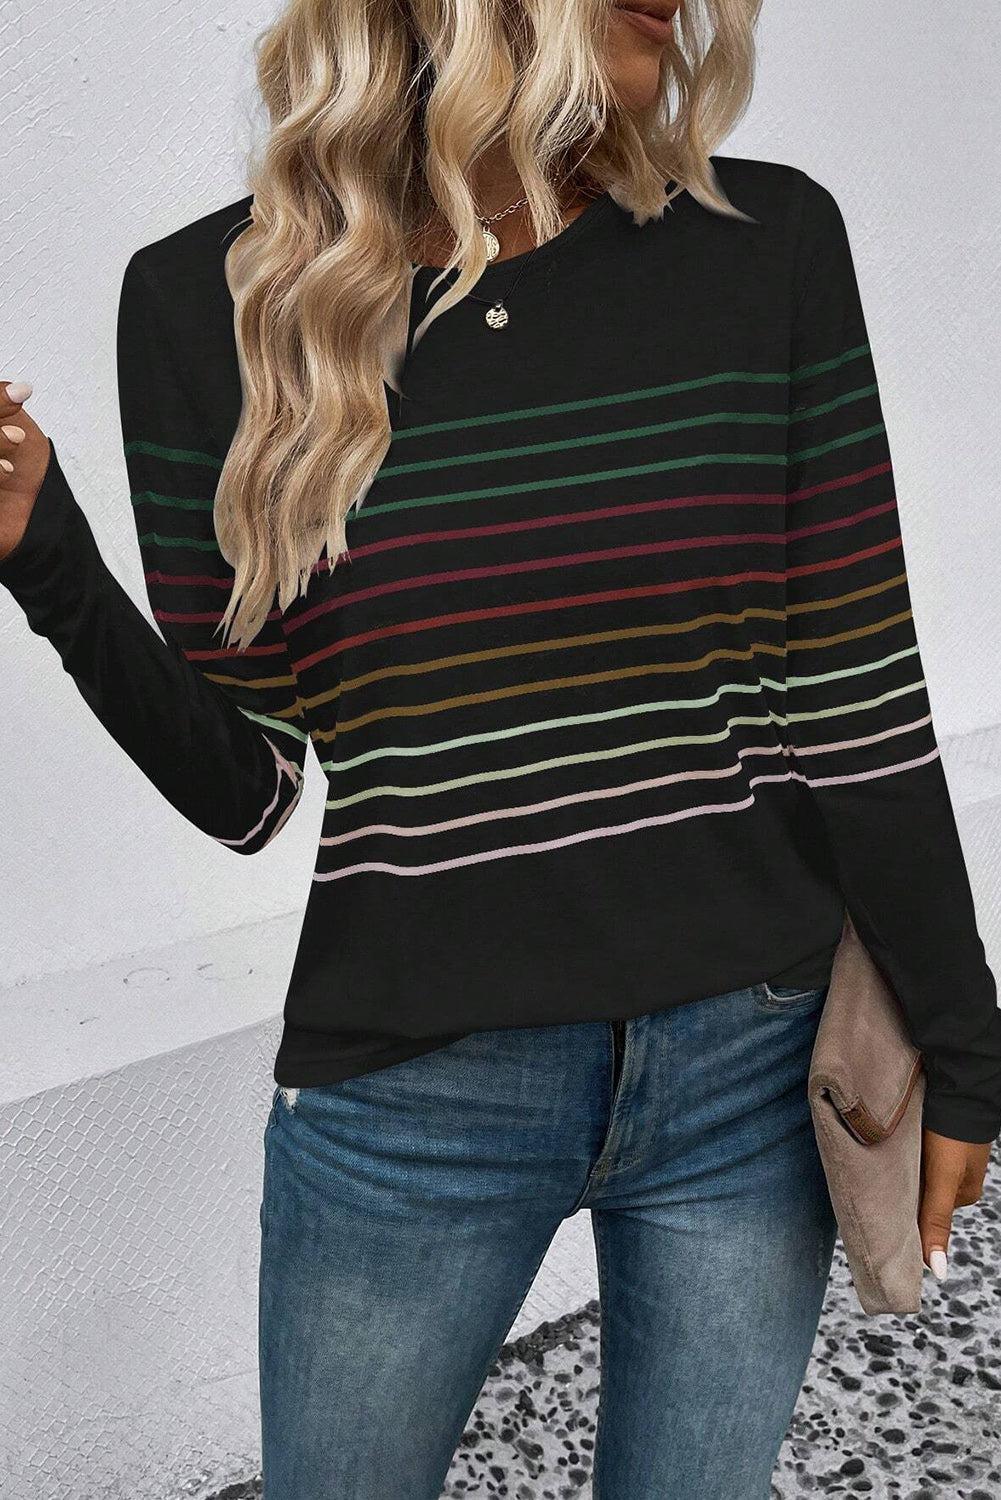 a woman with blonde hair wearing a black striped sweater